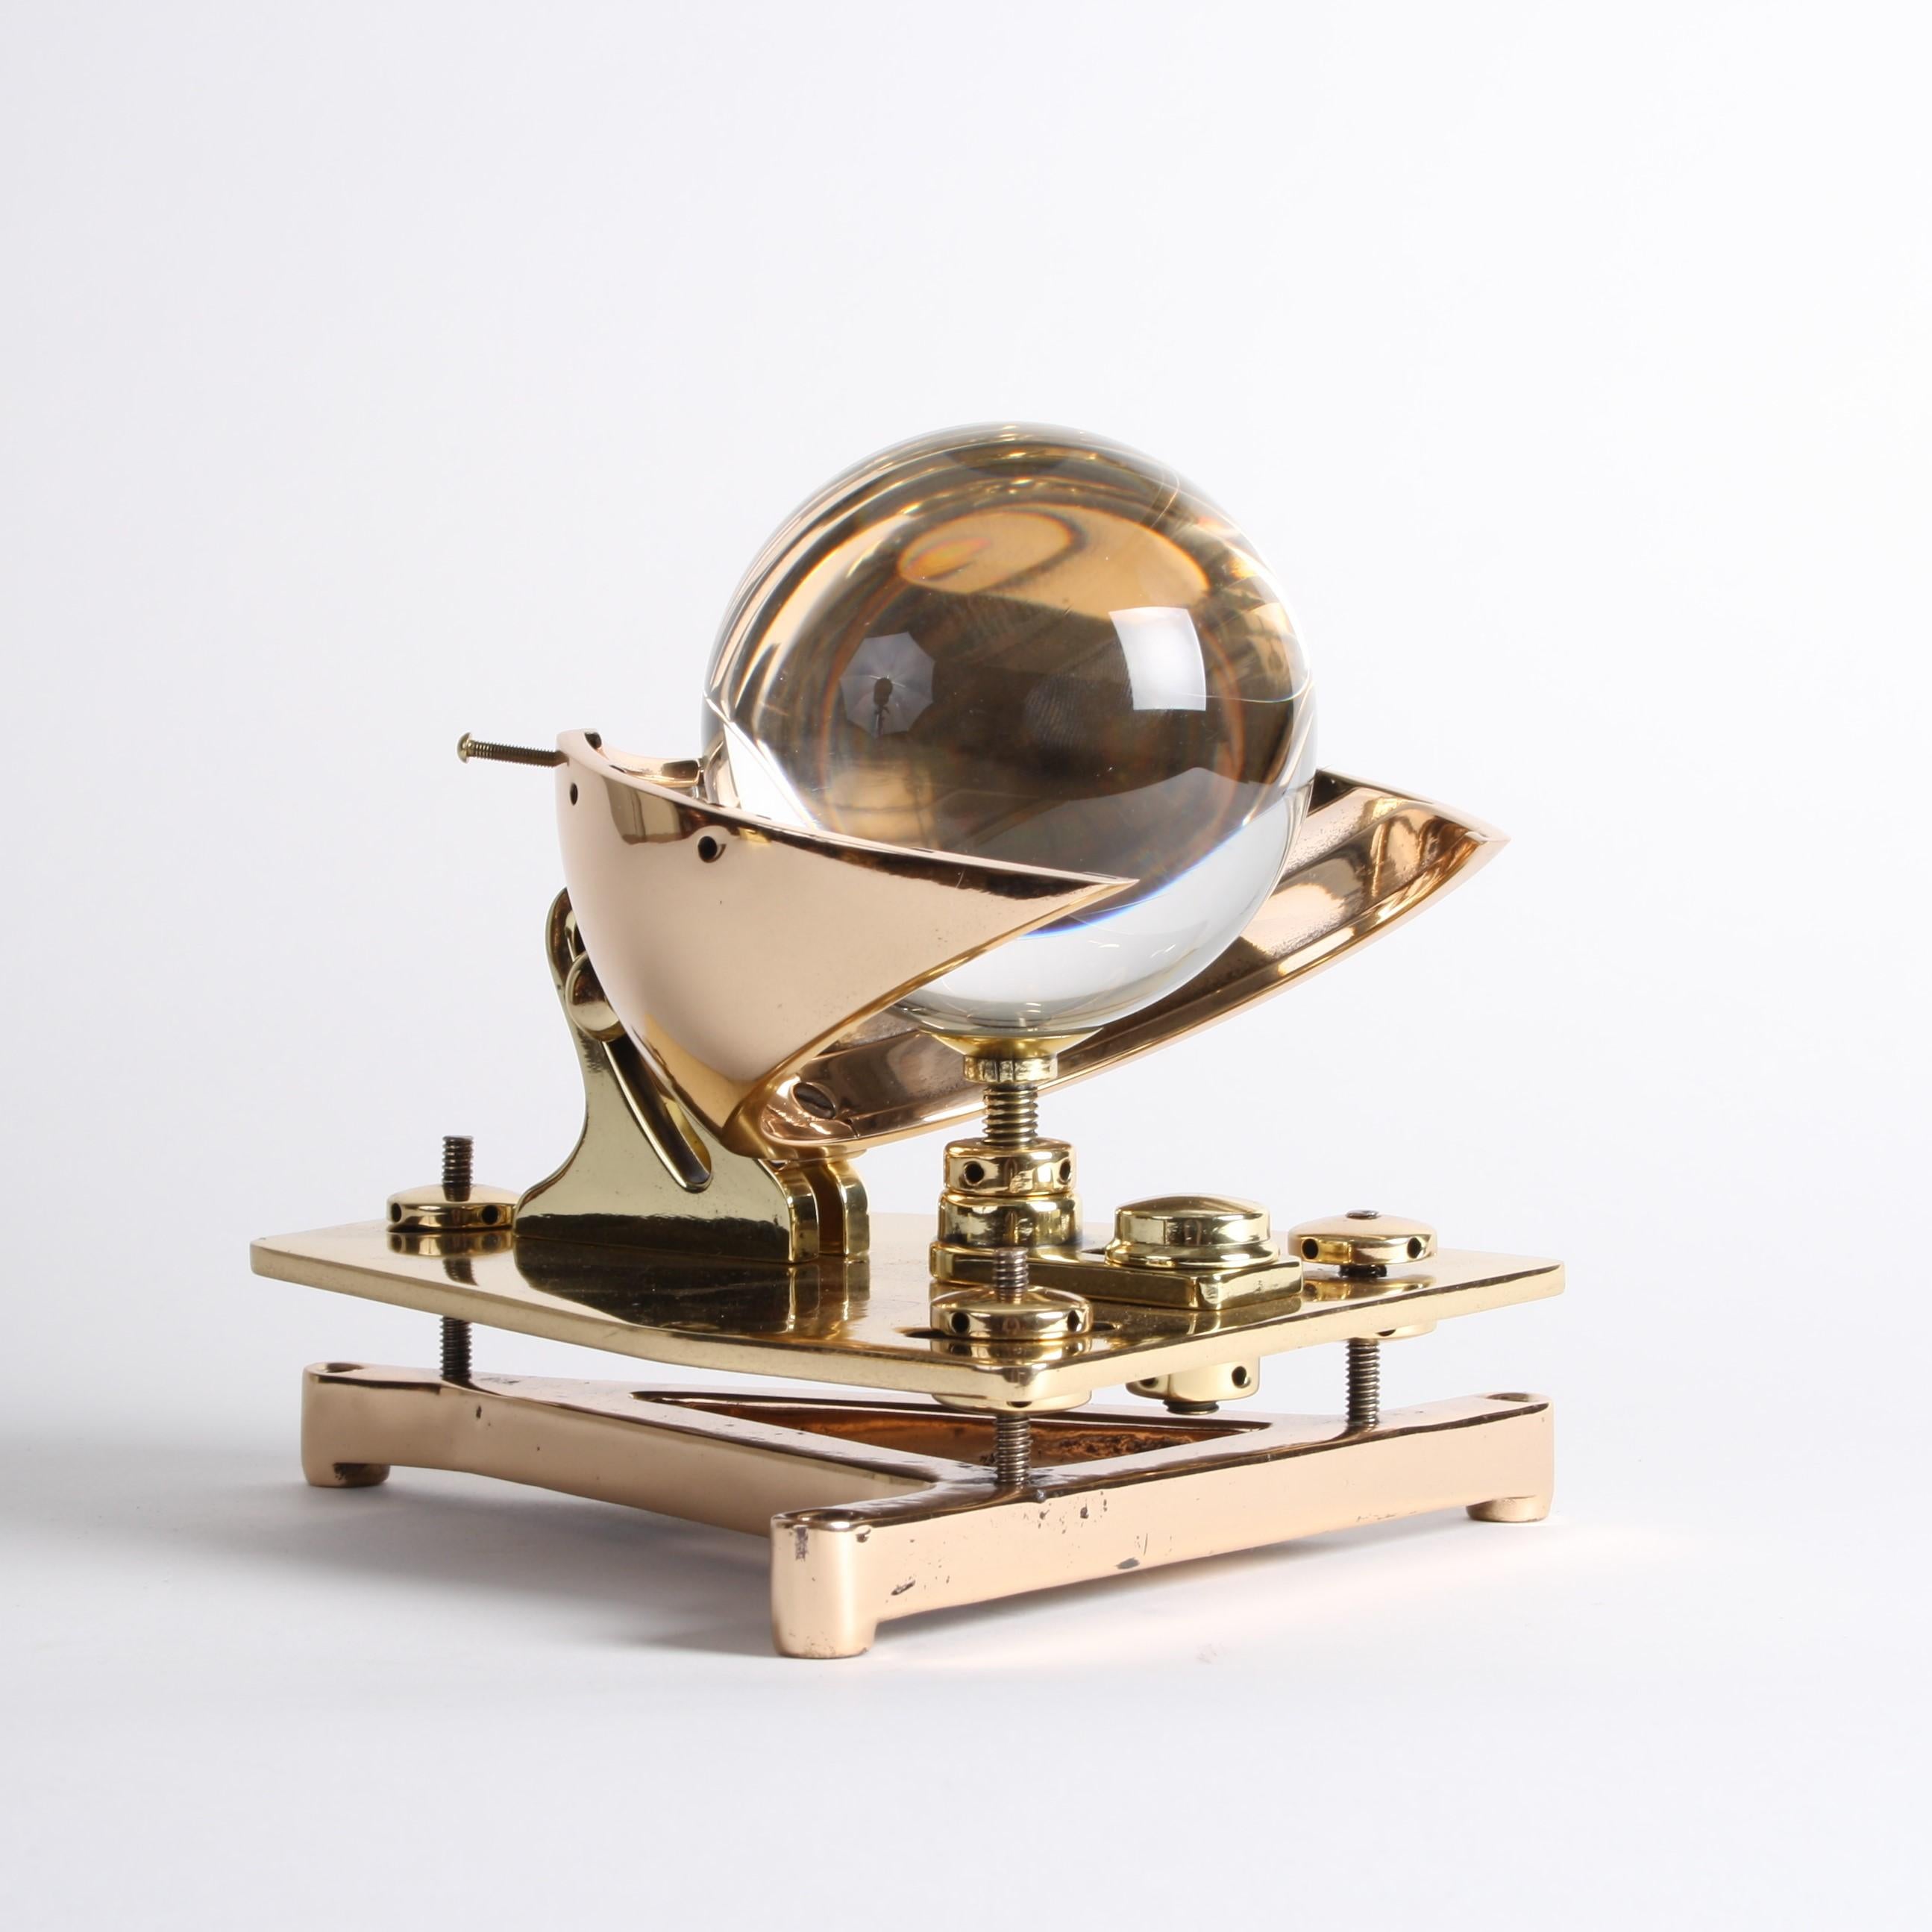 Brass Campbell–Stokes Sphere Sunshine Recorder by Casella of London